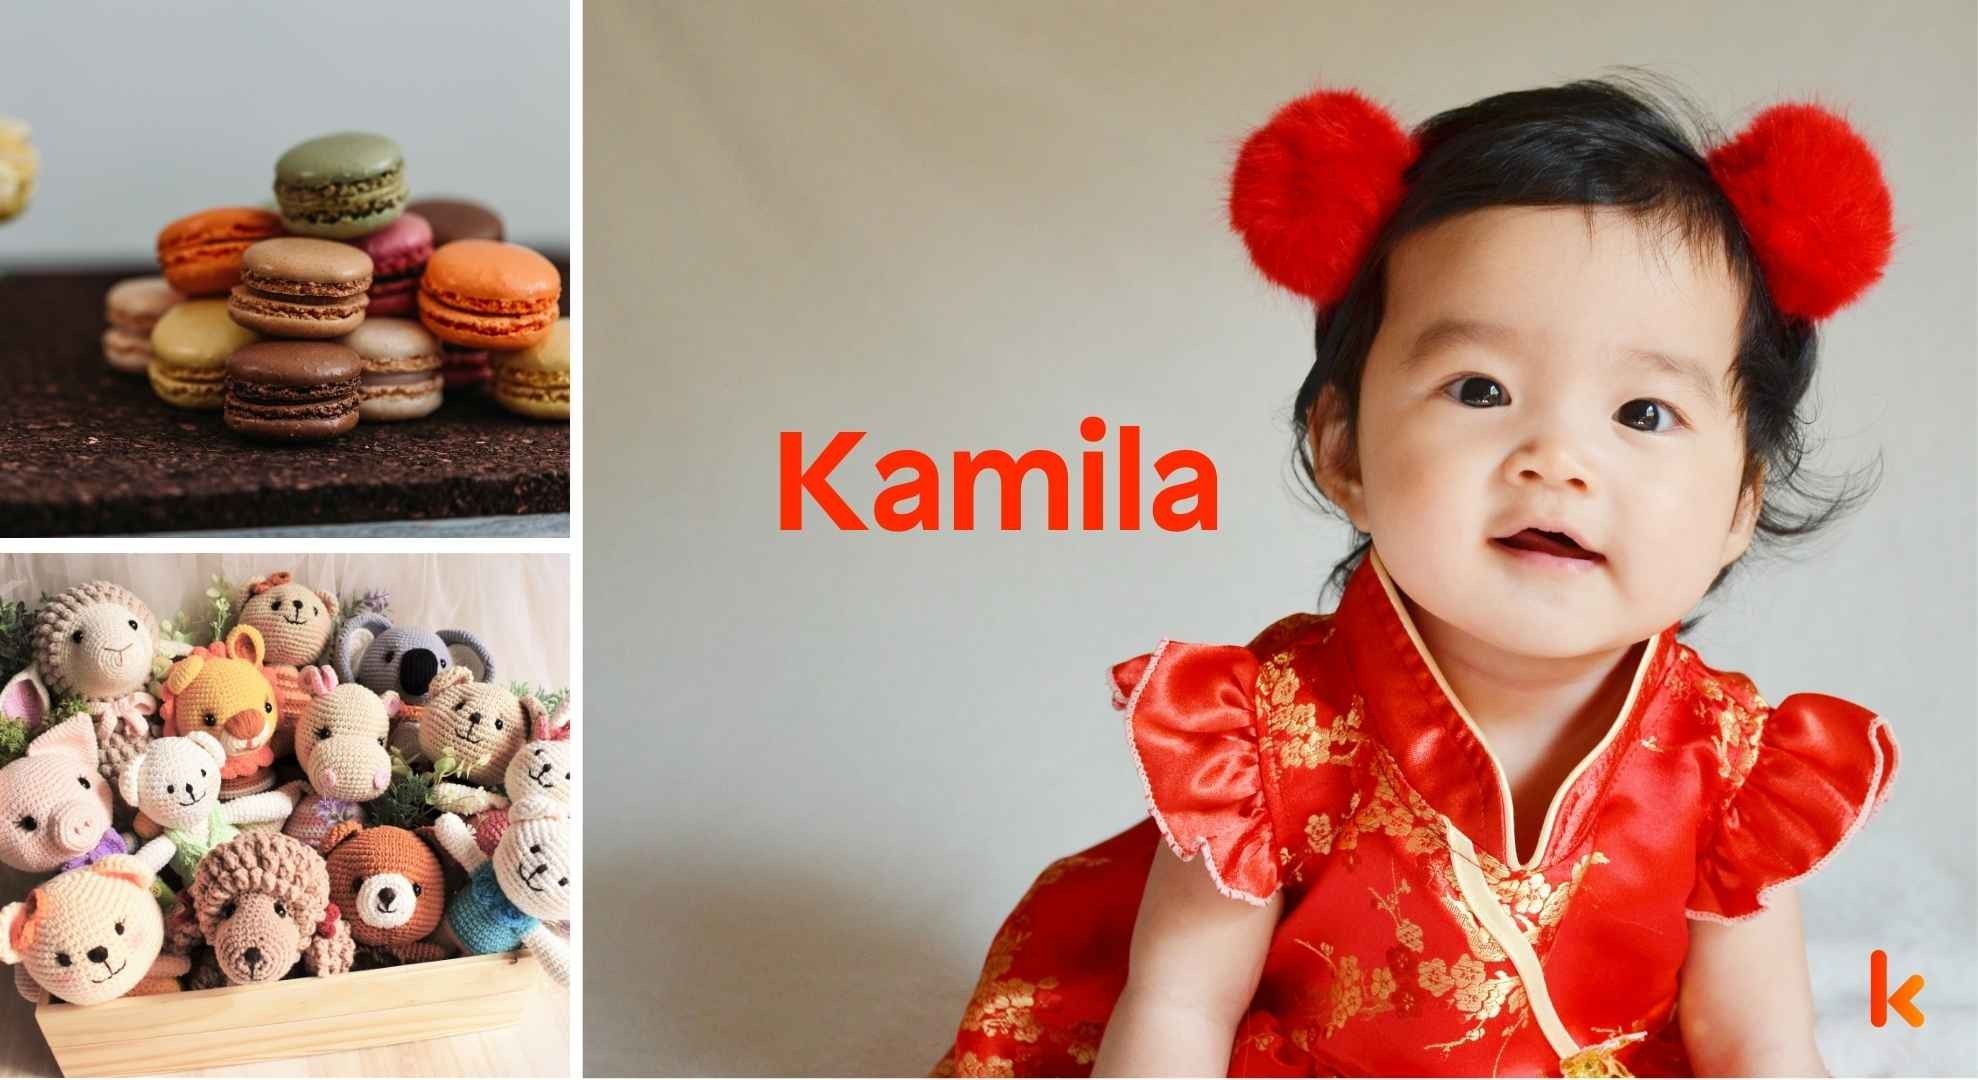 Meaning of the name Kamila